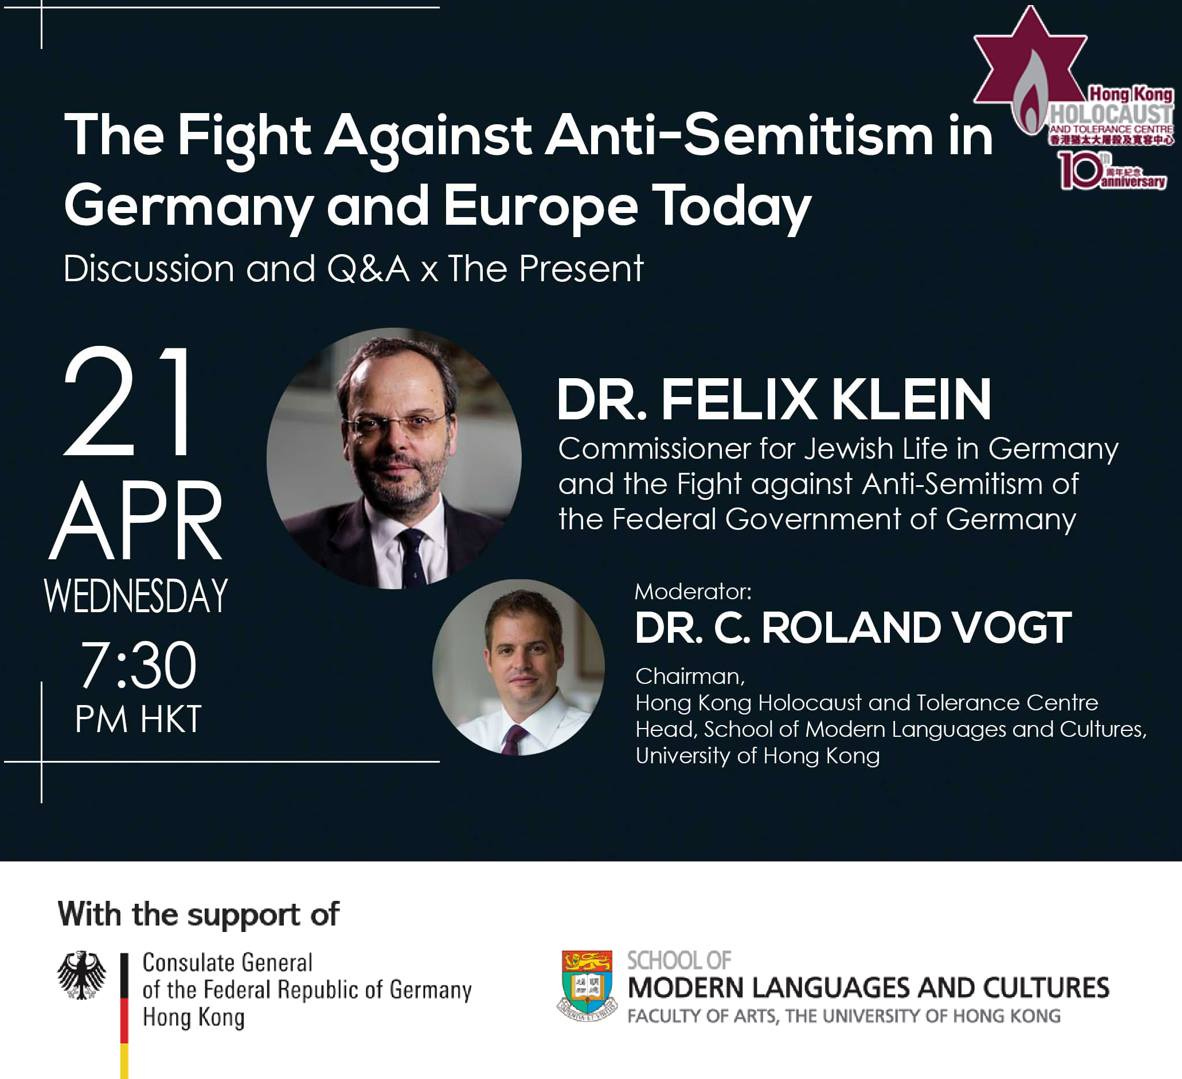 May be an image of 2 people and text that says 'The Fight Against Anti- Anti-Semitism in Germany and Europe Today Discussion and Q&A X The Present Hong Kong HOLOCAUST AND大大團級及業客中 DR. FELIX KLEIN Commissioner for Jewish Life in Germany and the Fight against Anti-Semitism of the Federal Government of Germany 21 APR WEDNESDAY 7:30 PM HKT Moderator: DR. ROLAND VOGT Chairman, Hong Kong Holocaust and Tolerance Centre Head, School Modern anguages and Cultures, University of Hong Kong With the support of Consulate General Federal Republic of Germany Hong Kong SCHOOL 2肉 MODERN LANGUAGES AND CULTURES AS FACULTY OF ARTS, THE UNIVERSITY OF HONG KONG'